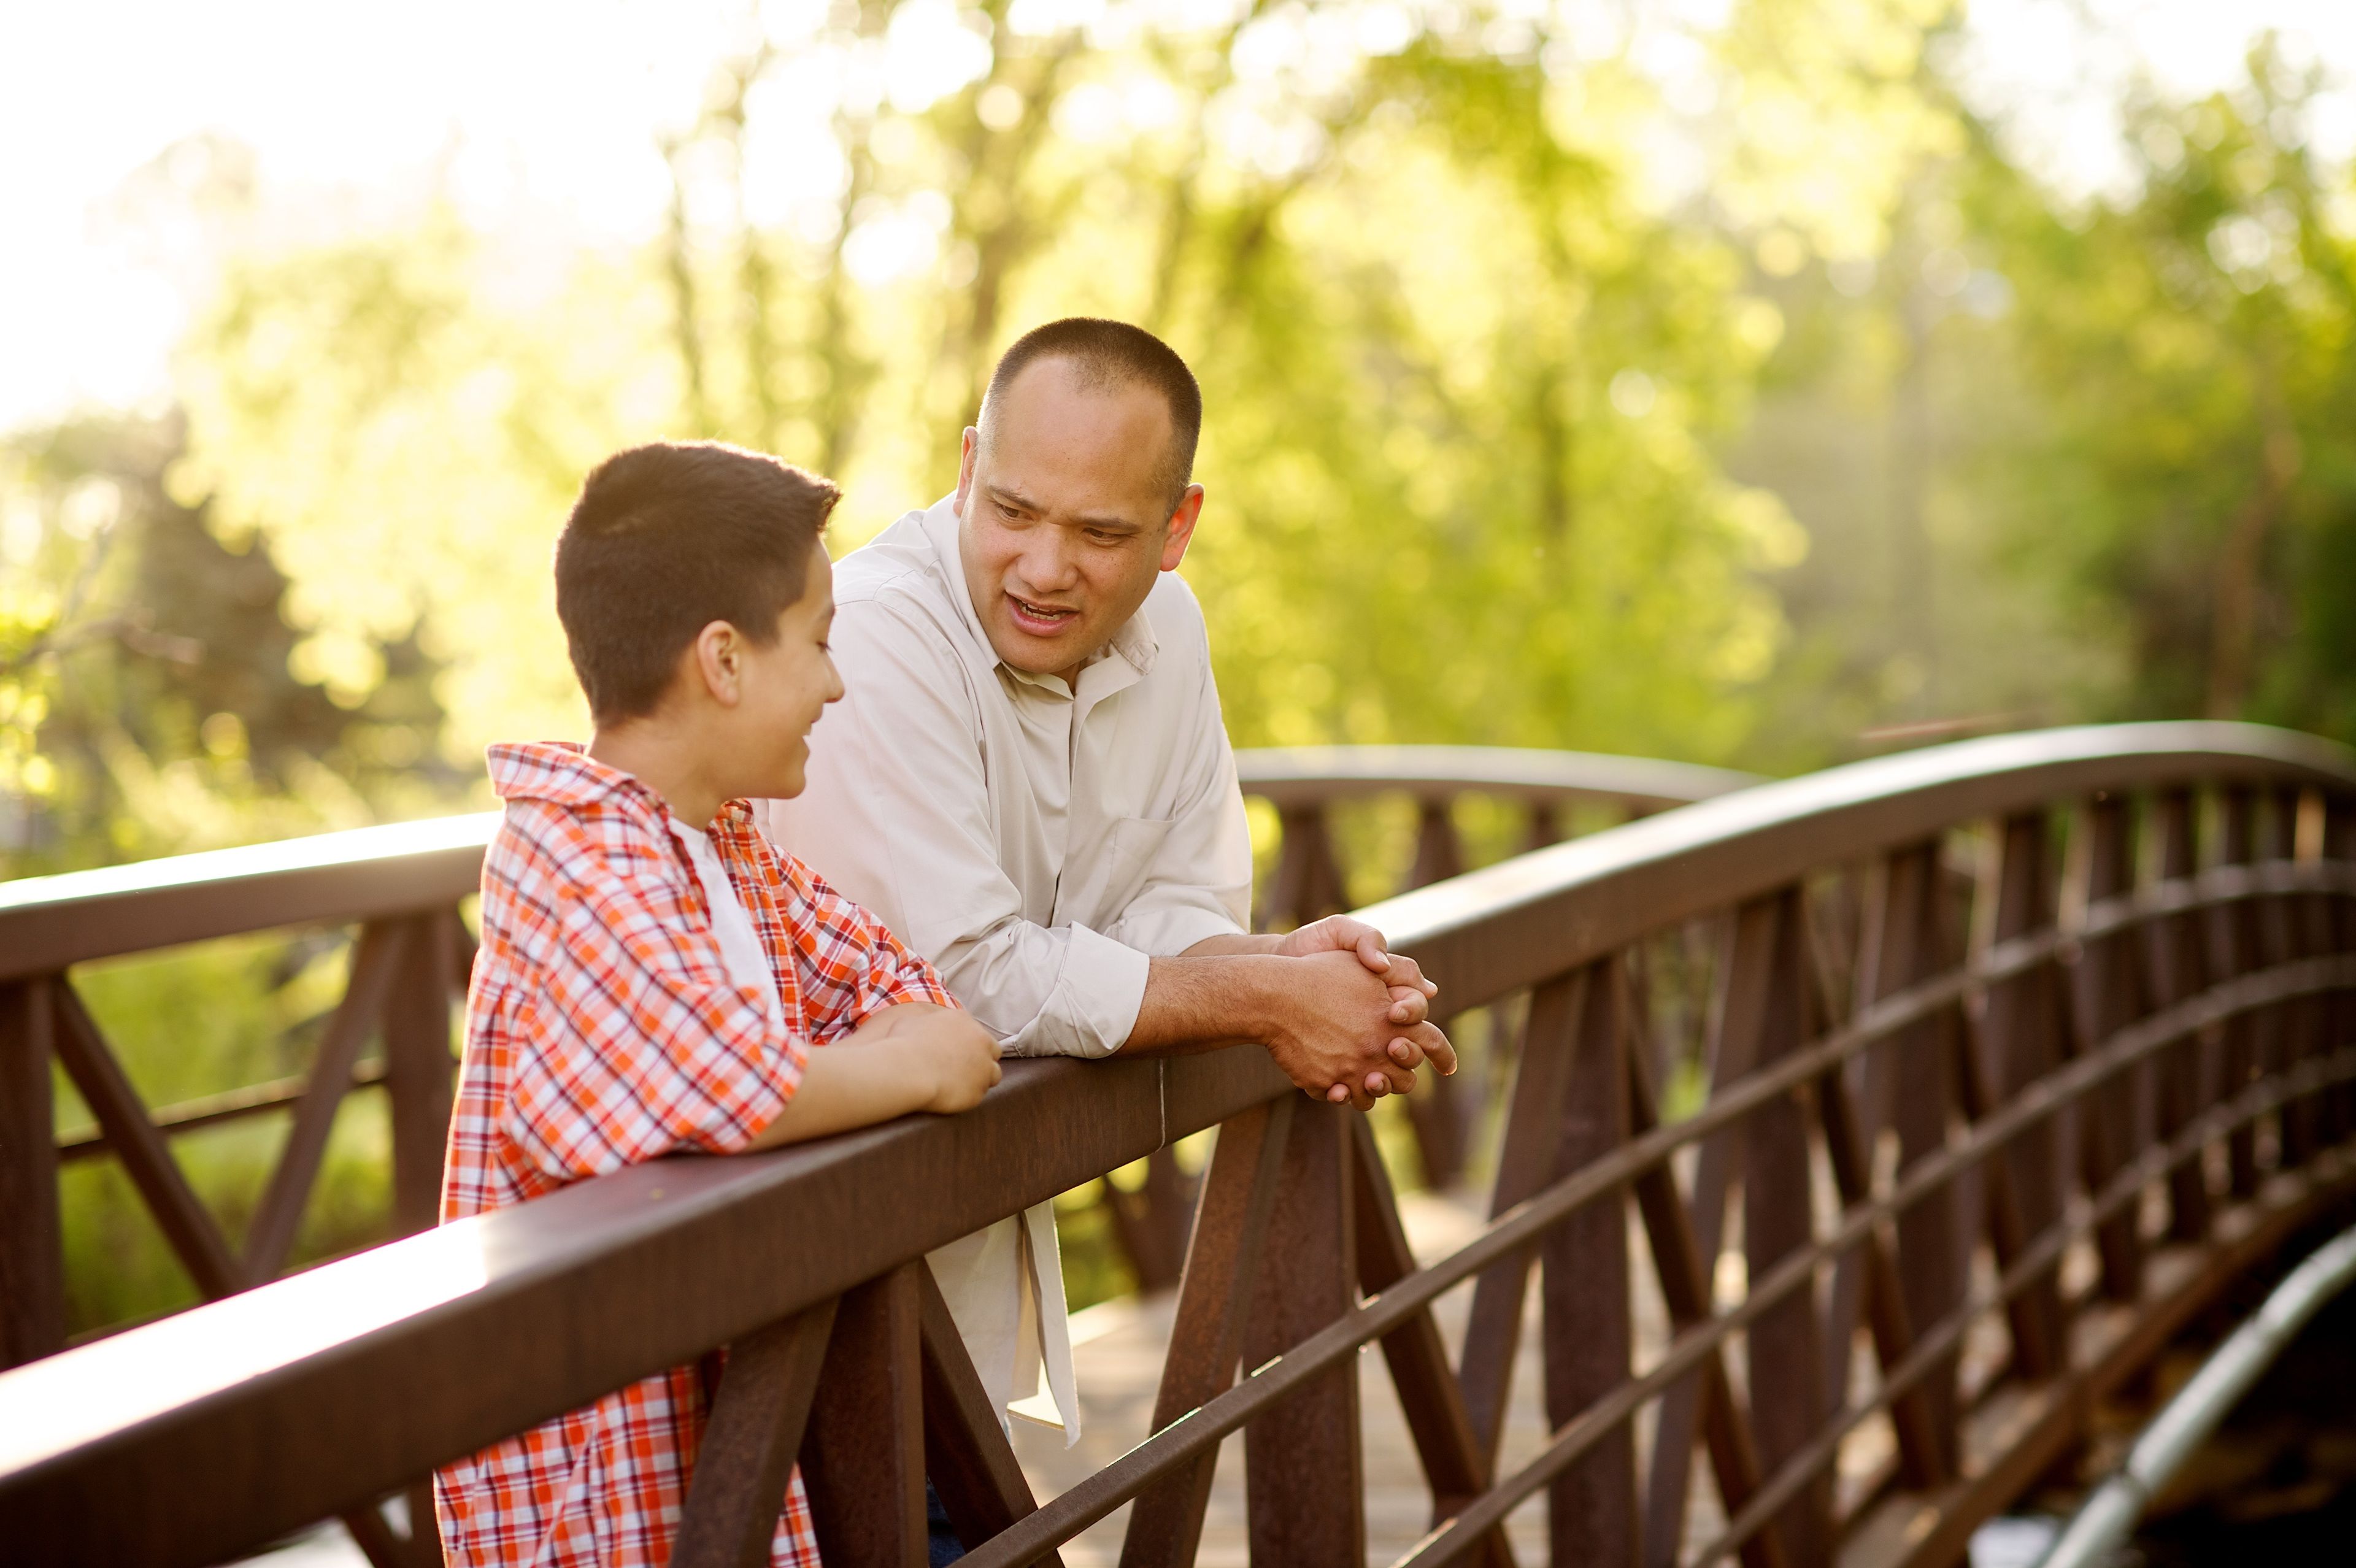 A father talks with his son on a bridge.